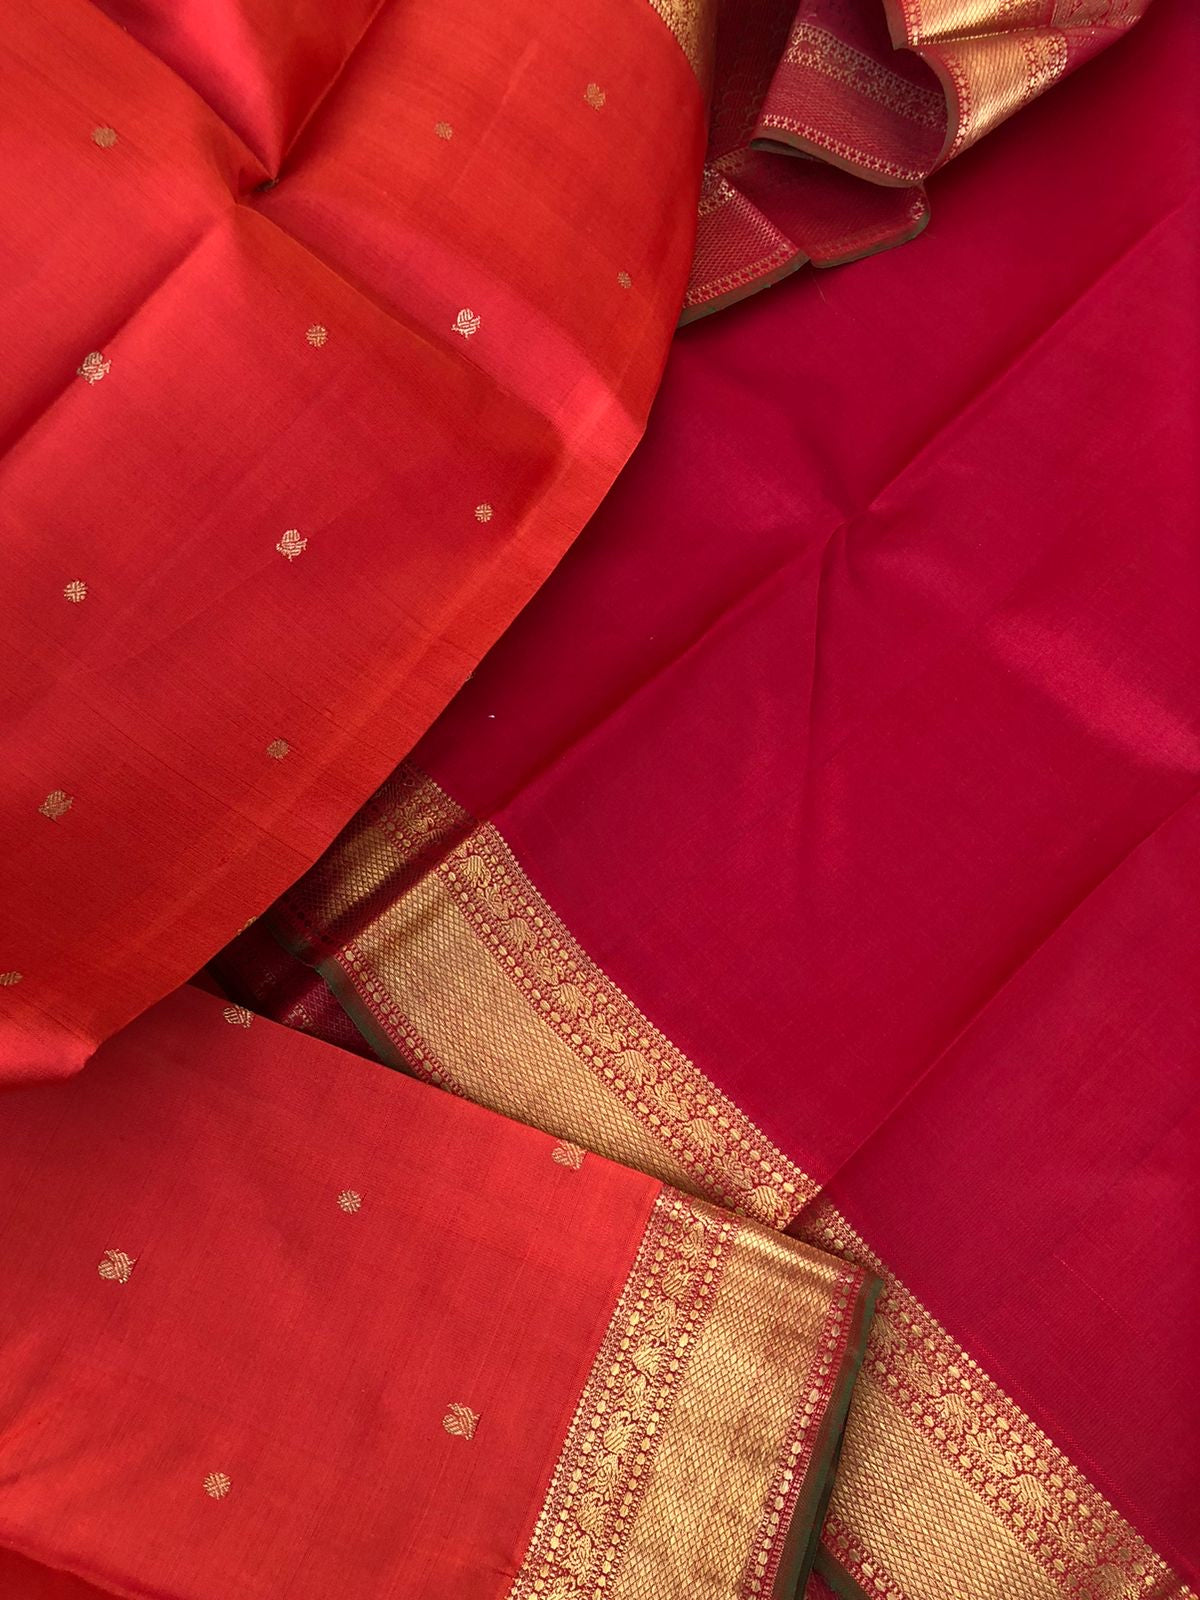 Tara - Traditional Colours on Traditional Kanchivarams - gorgeous burnt orange and red with solid gold zari woven borders and pallu